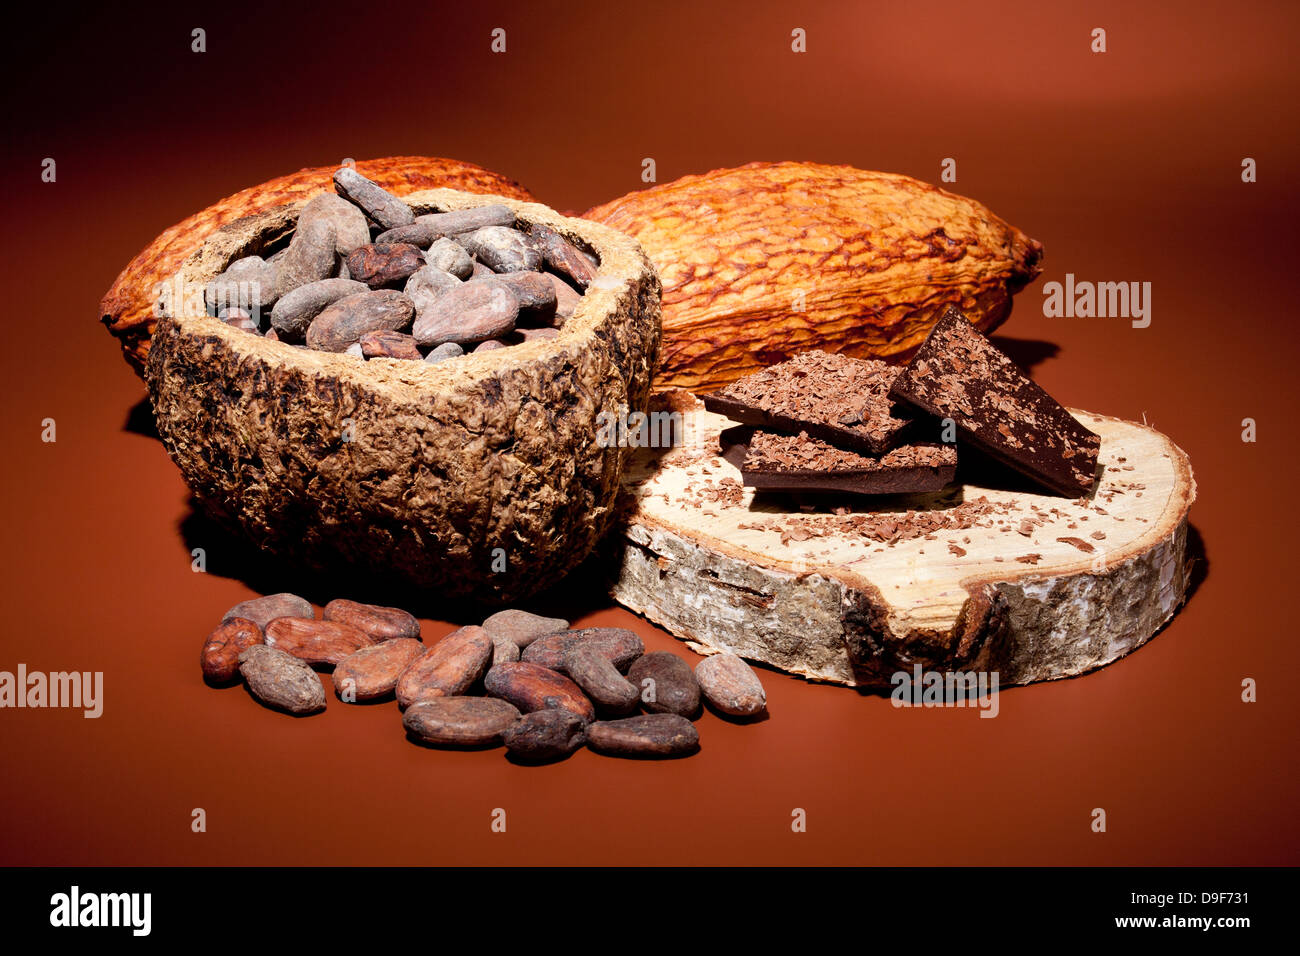 Cacao beans with cocoa fruit and chocolate, Cocoa beans and cocoa fruit and chocolate Stock Photo